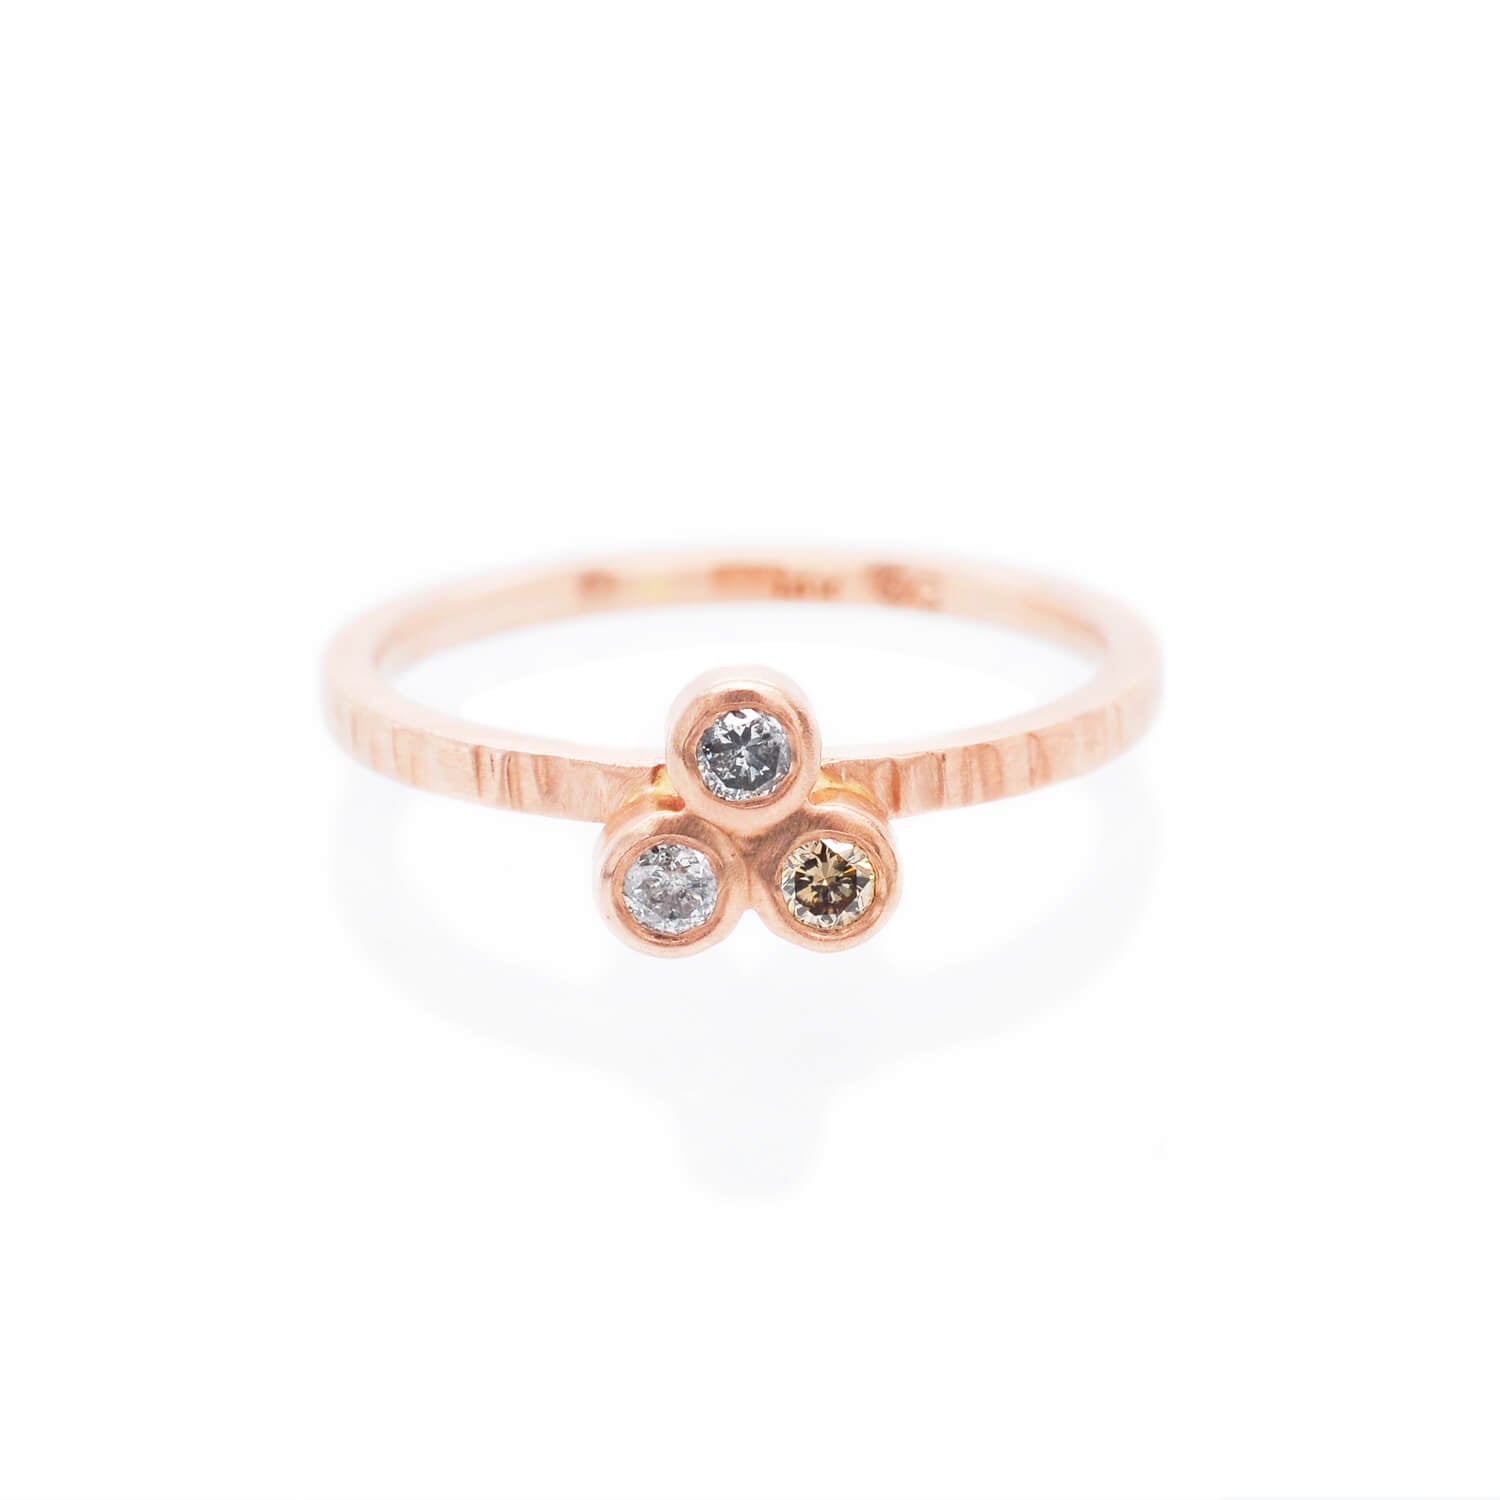 3-stone red gold ring with salt and pepper and champagne diamonds. Ethically crafted by EC Design Jewelry in Minneapolis, MN.